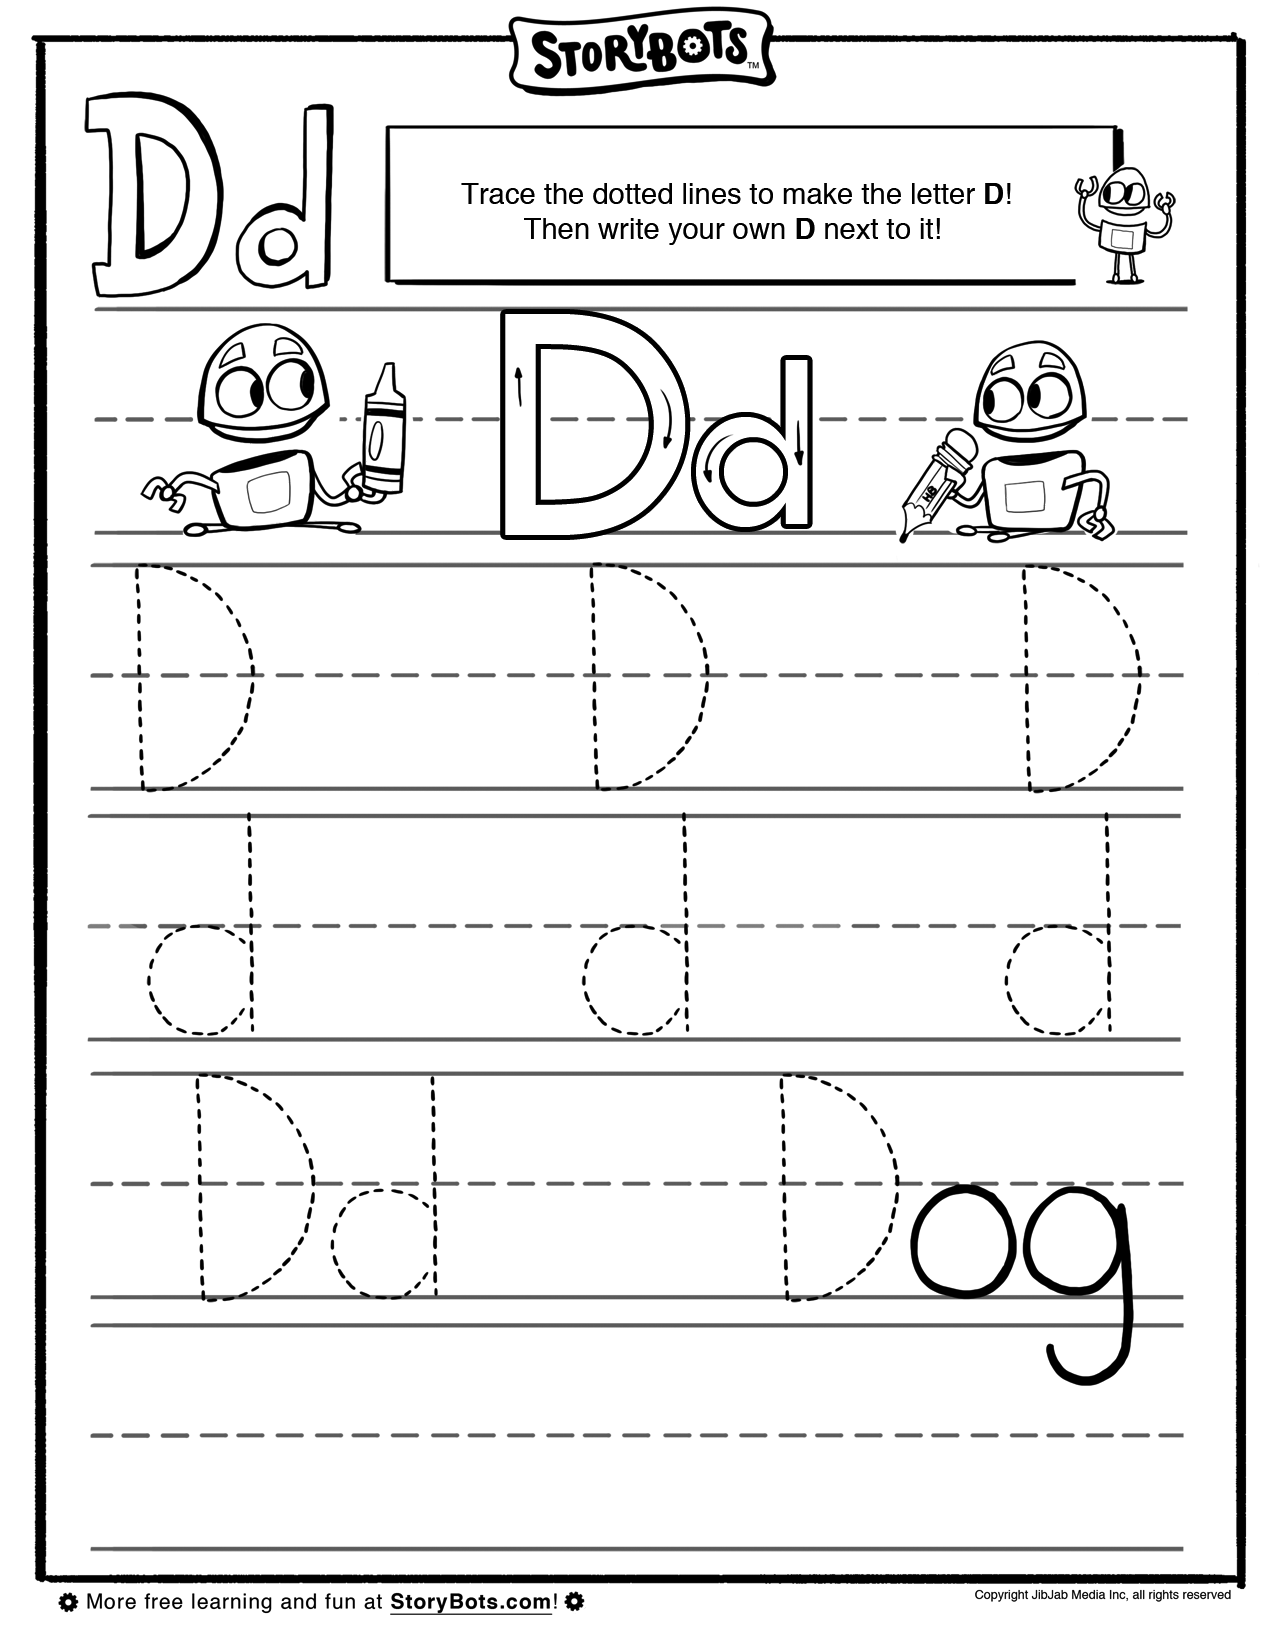 It&amp;#039;s Easy To Draw A Letter D. Just Trace The Dotted Lines